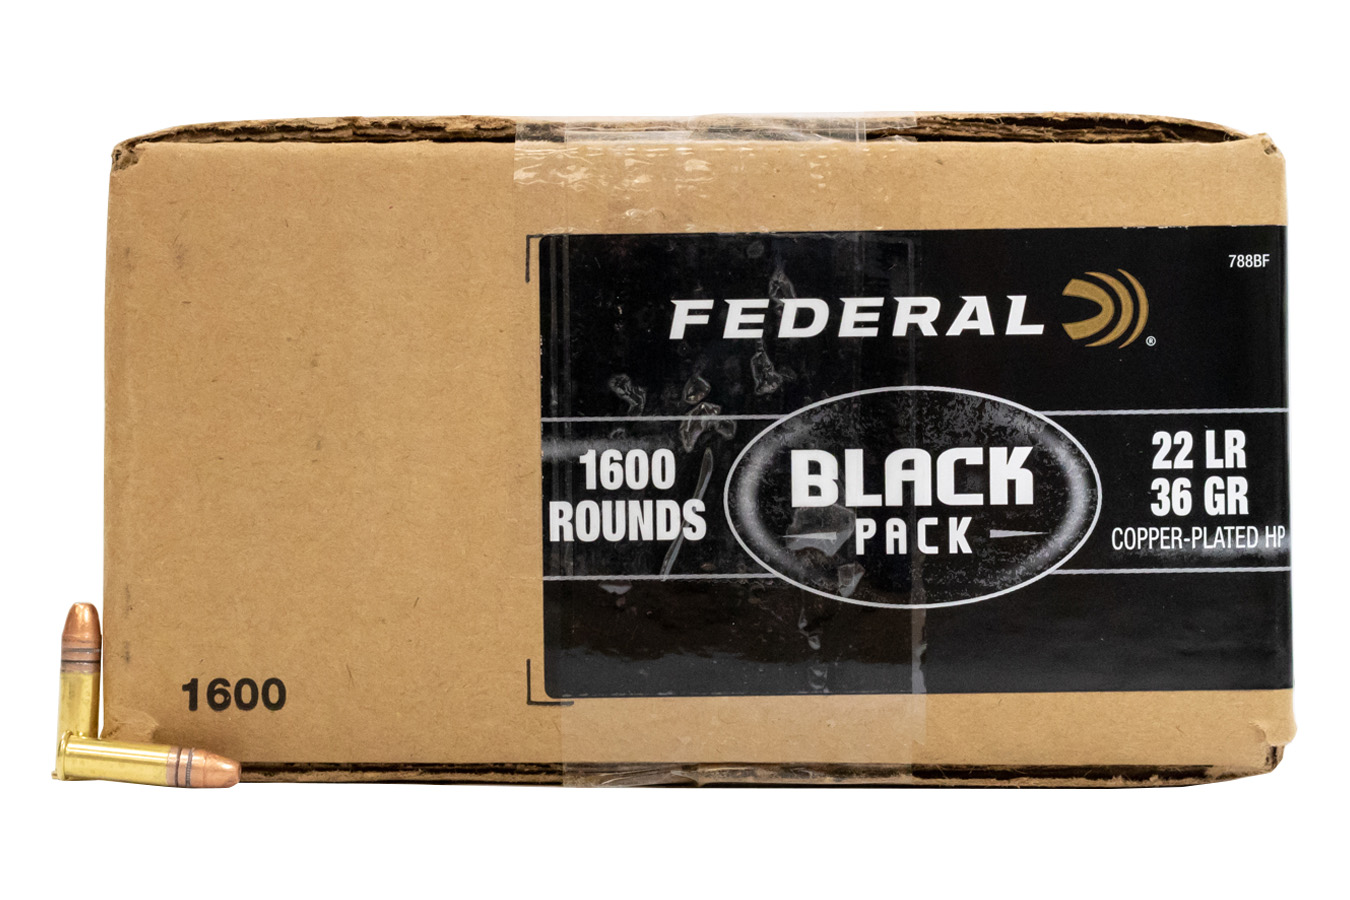 Federal 22 LR 36 Gr Copper Plated Hollow Point Black Pack 1600 Box 